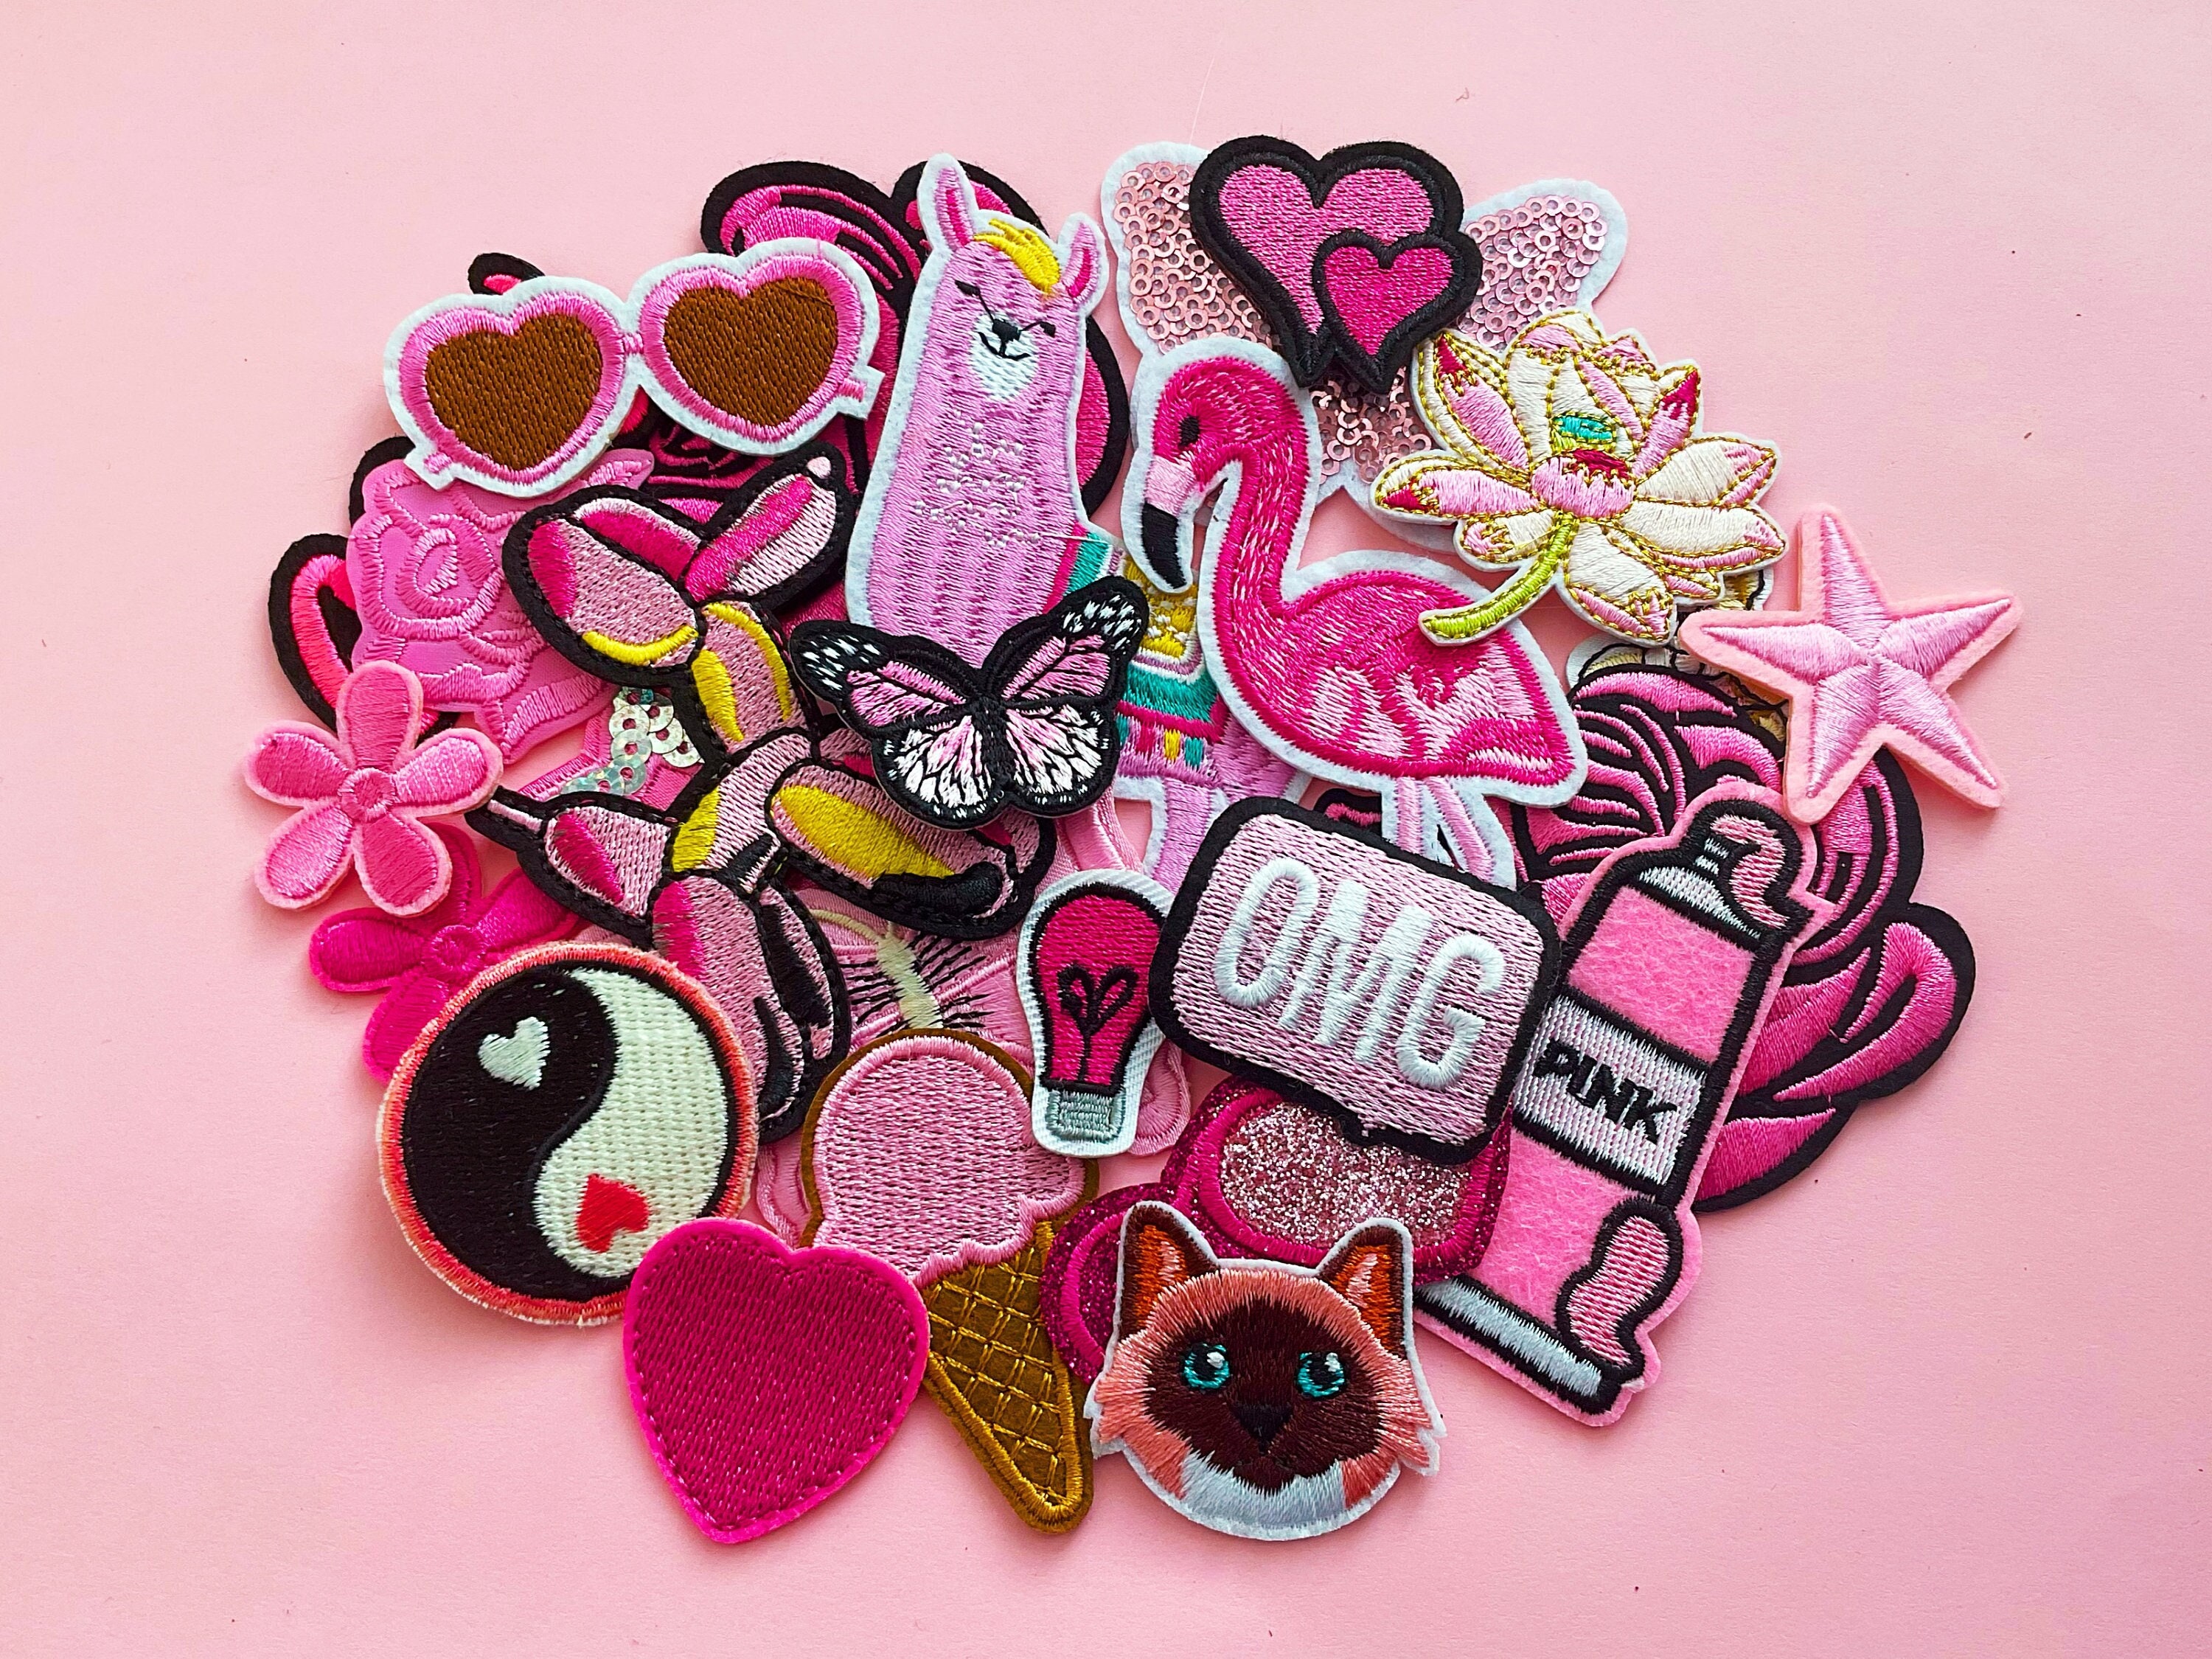 40 Designs Pink Patches for Clothing, Patches for Jackets Iron on